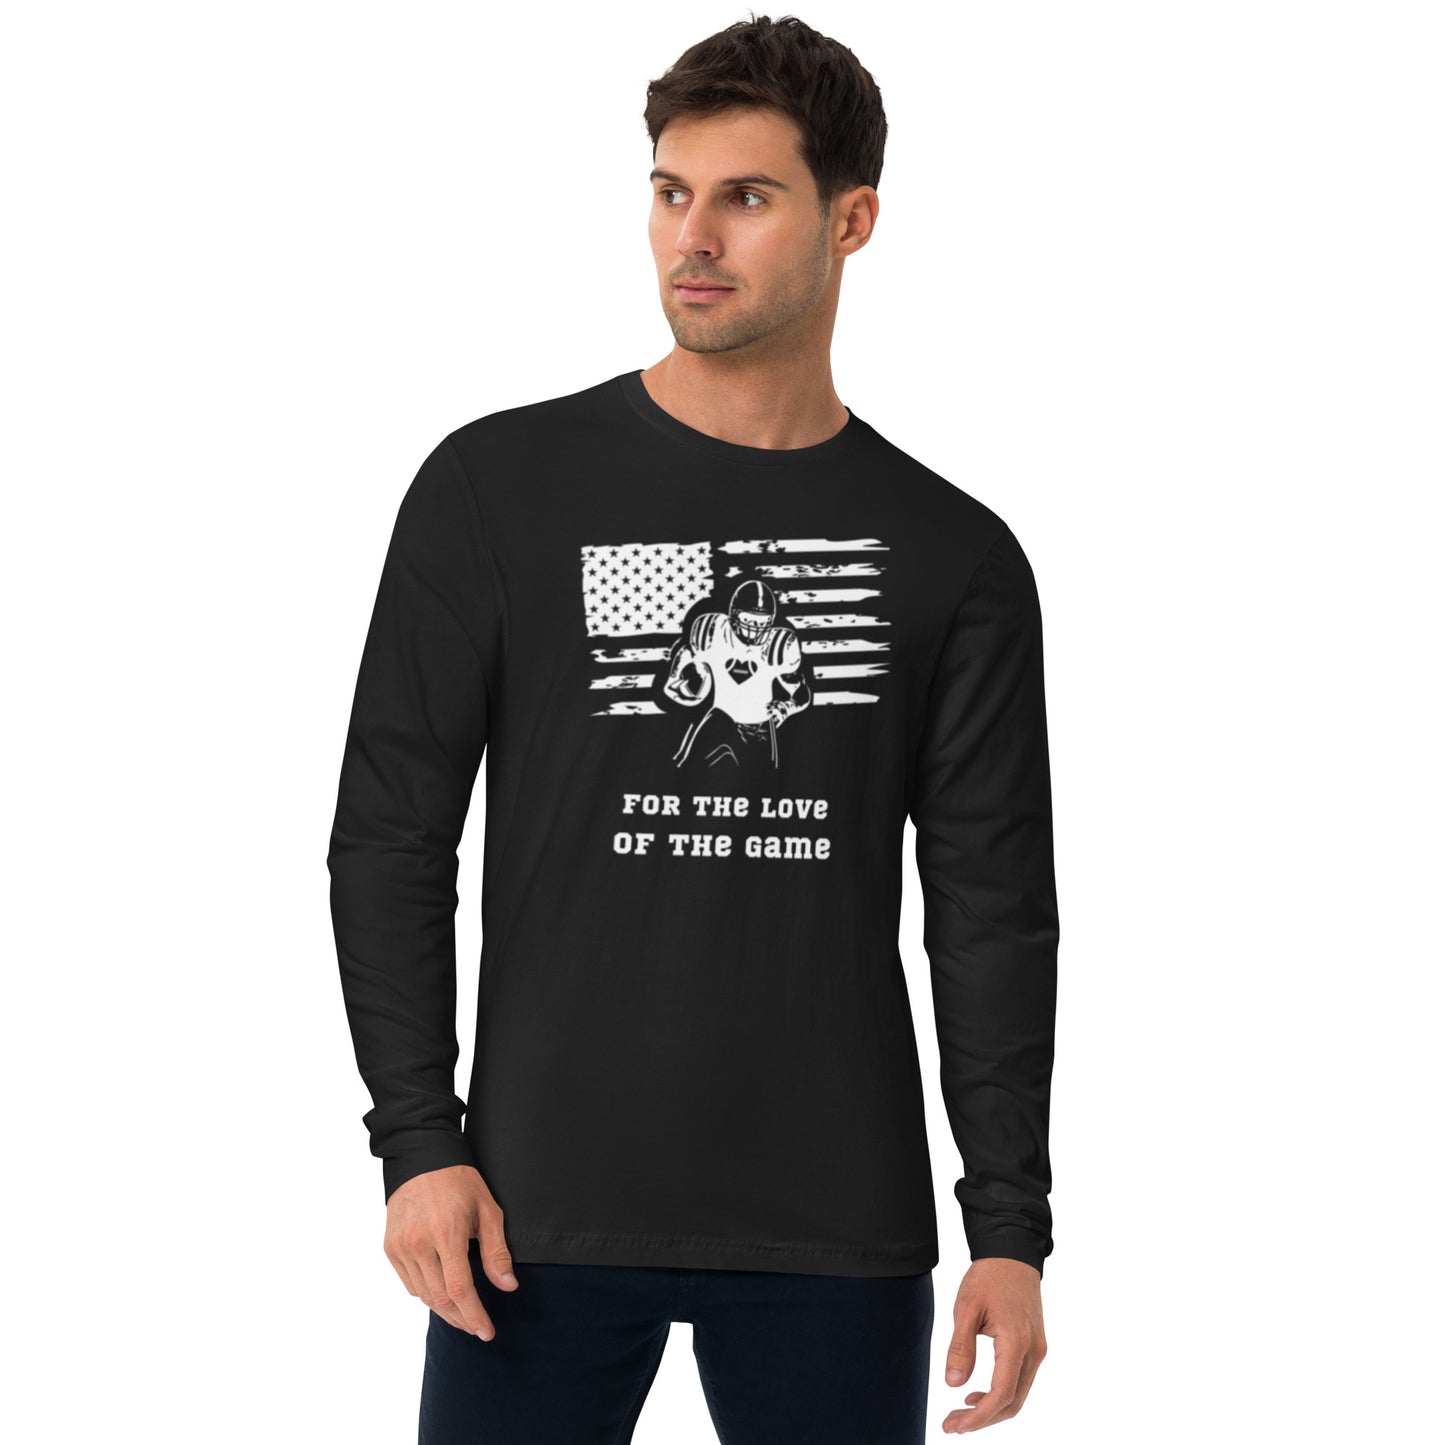 AFA American Football For The Love Of The game Men’s Long Sleeve Fitted Crew Neck Top